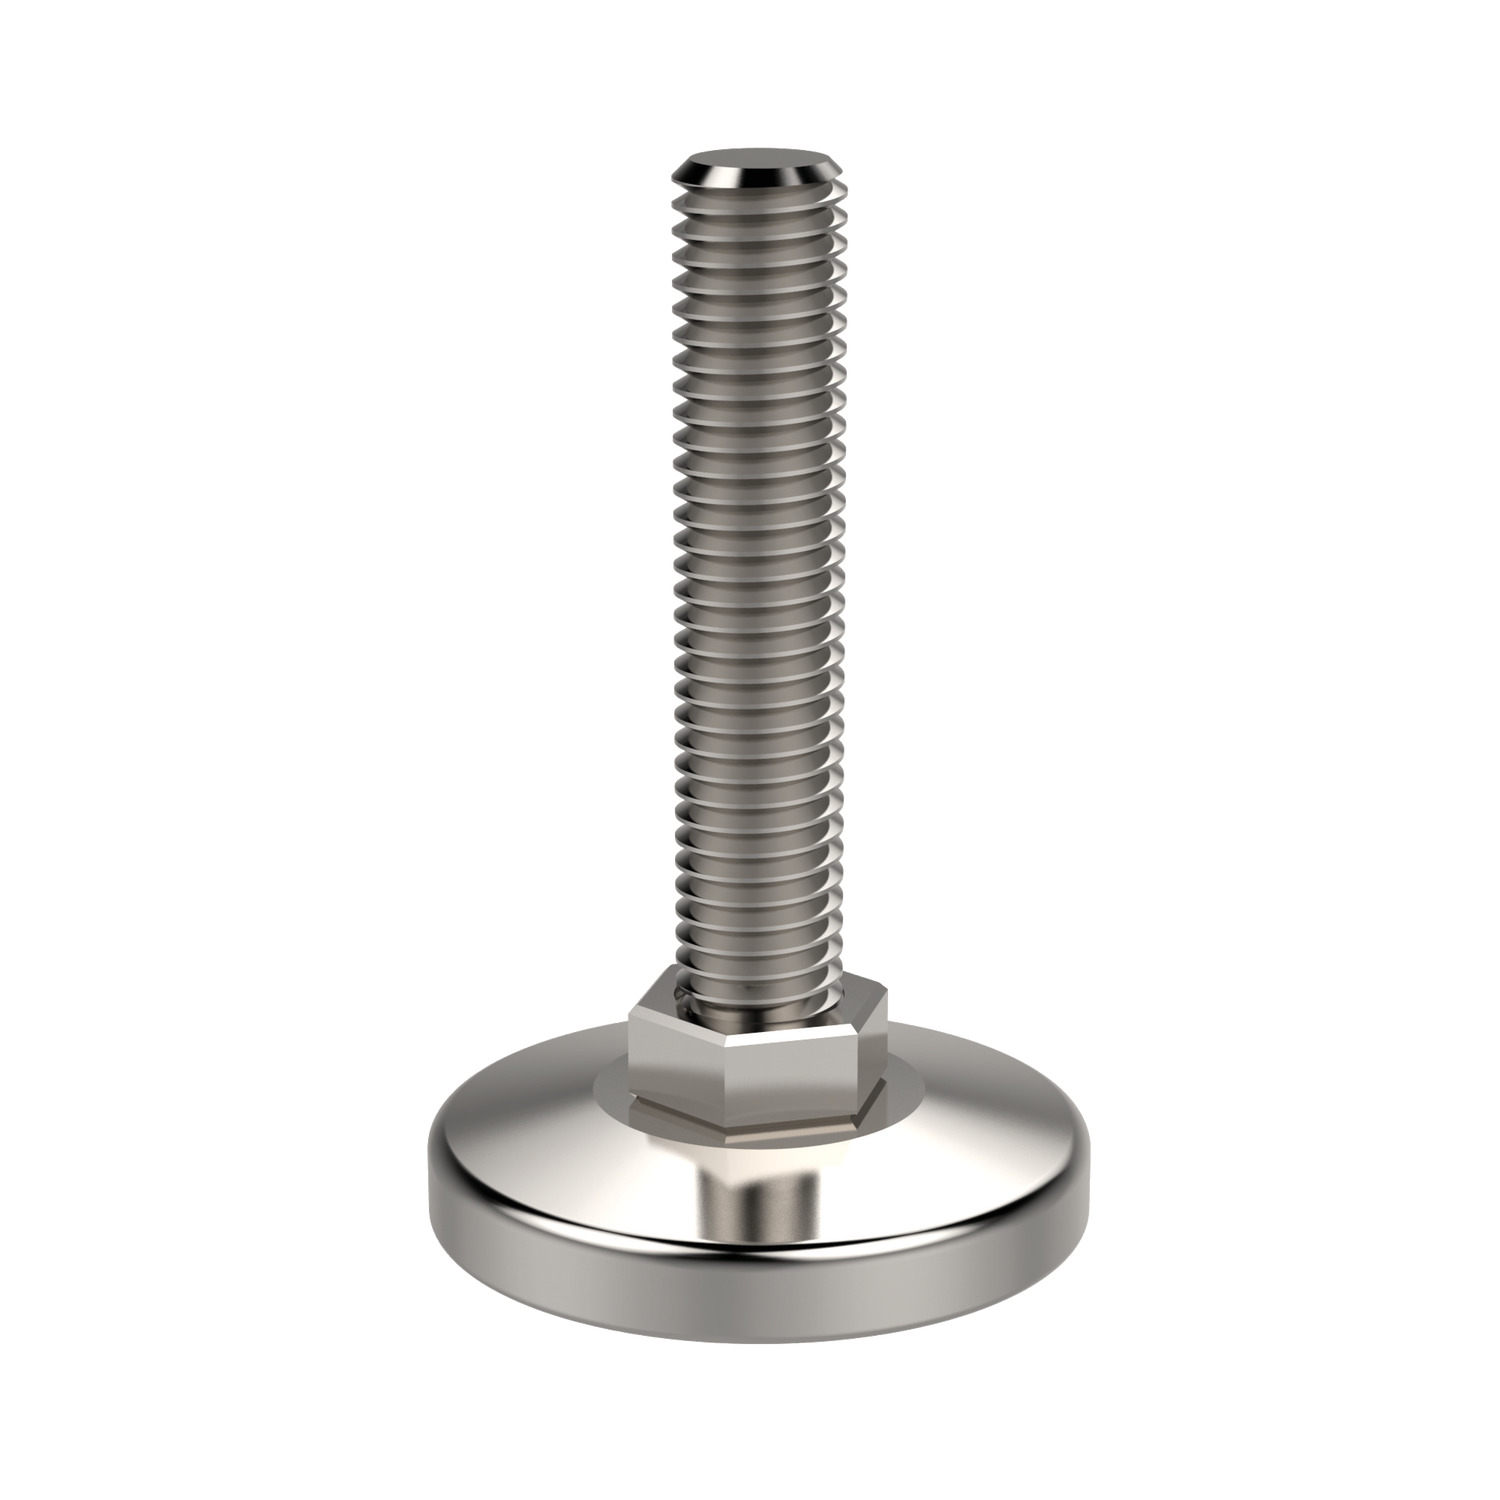 34615.W0800 Mini Levelling Feet - Stainless Steel Stainless Steel - 40mm pad - M8 x 25mm thread